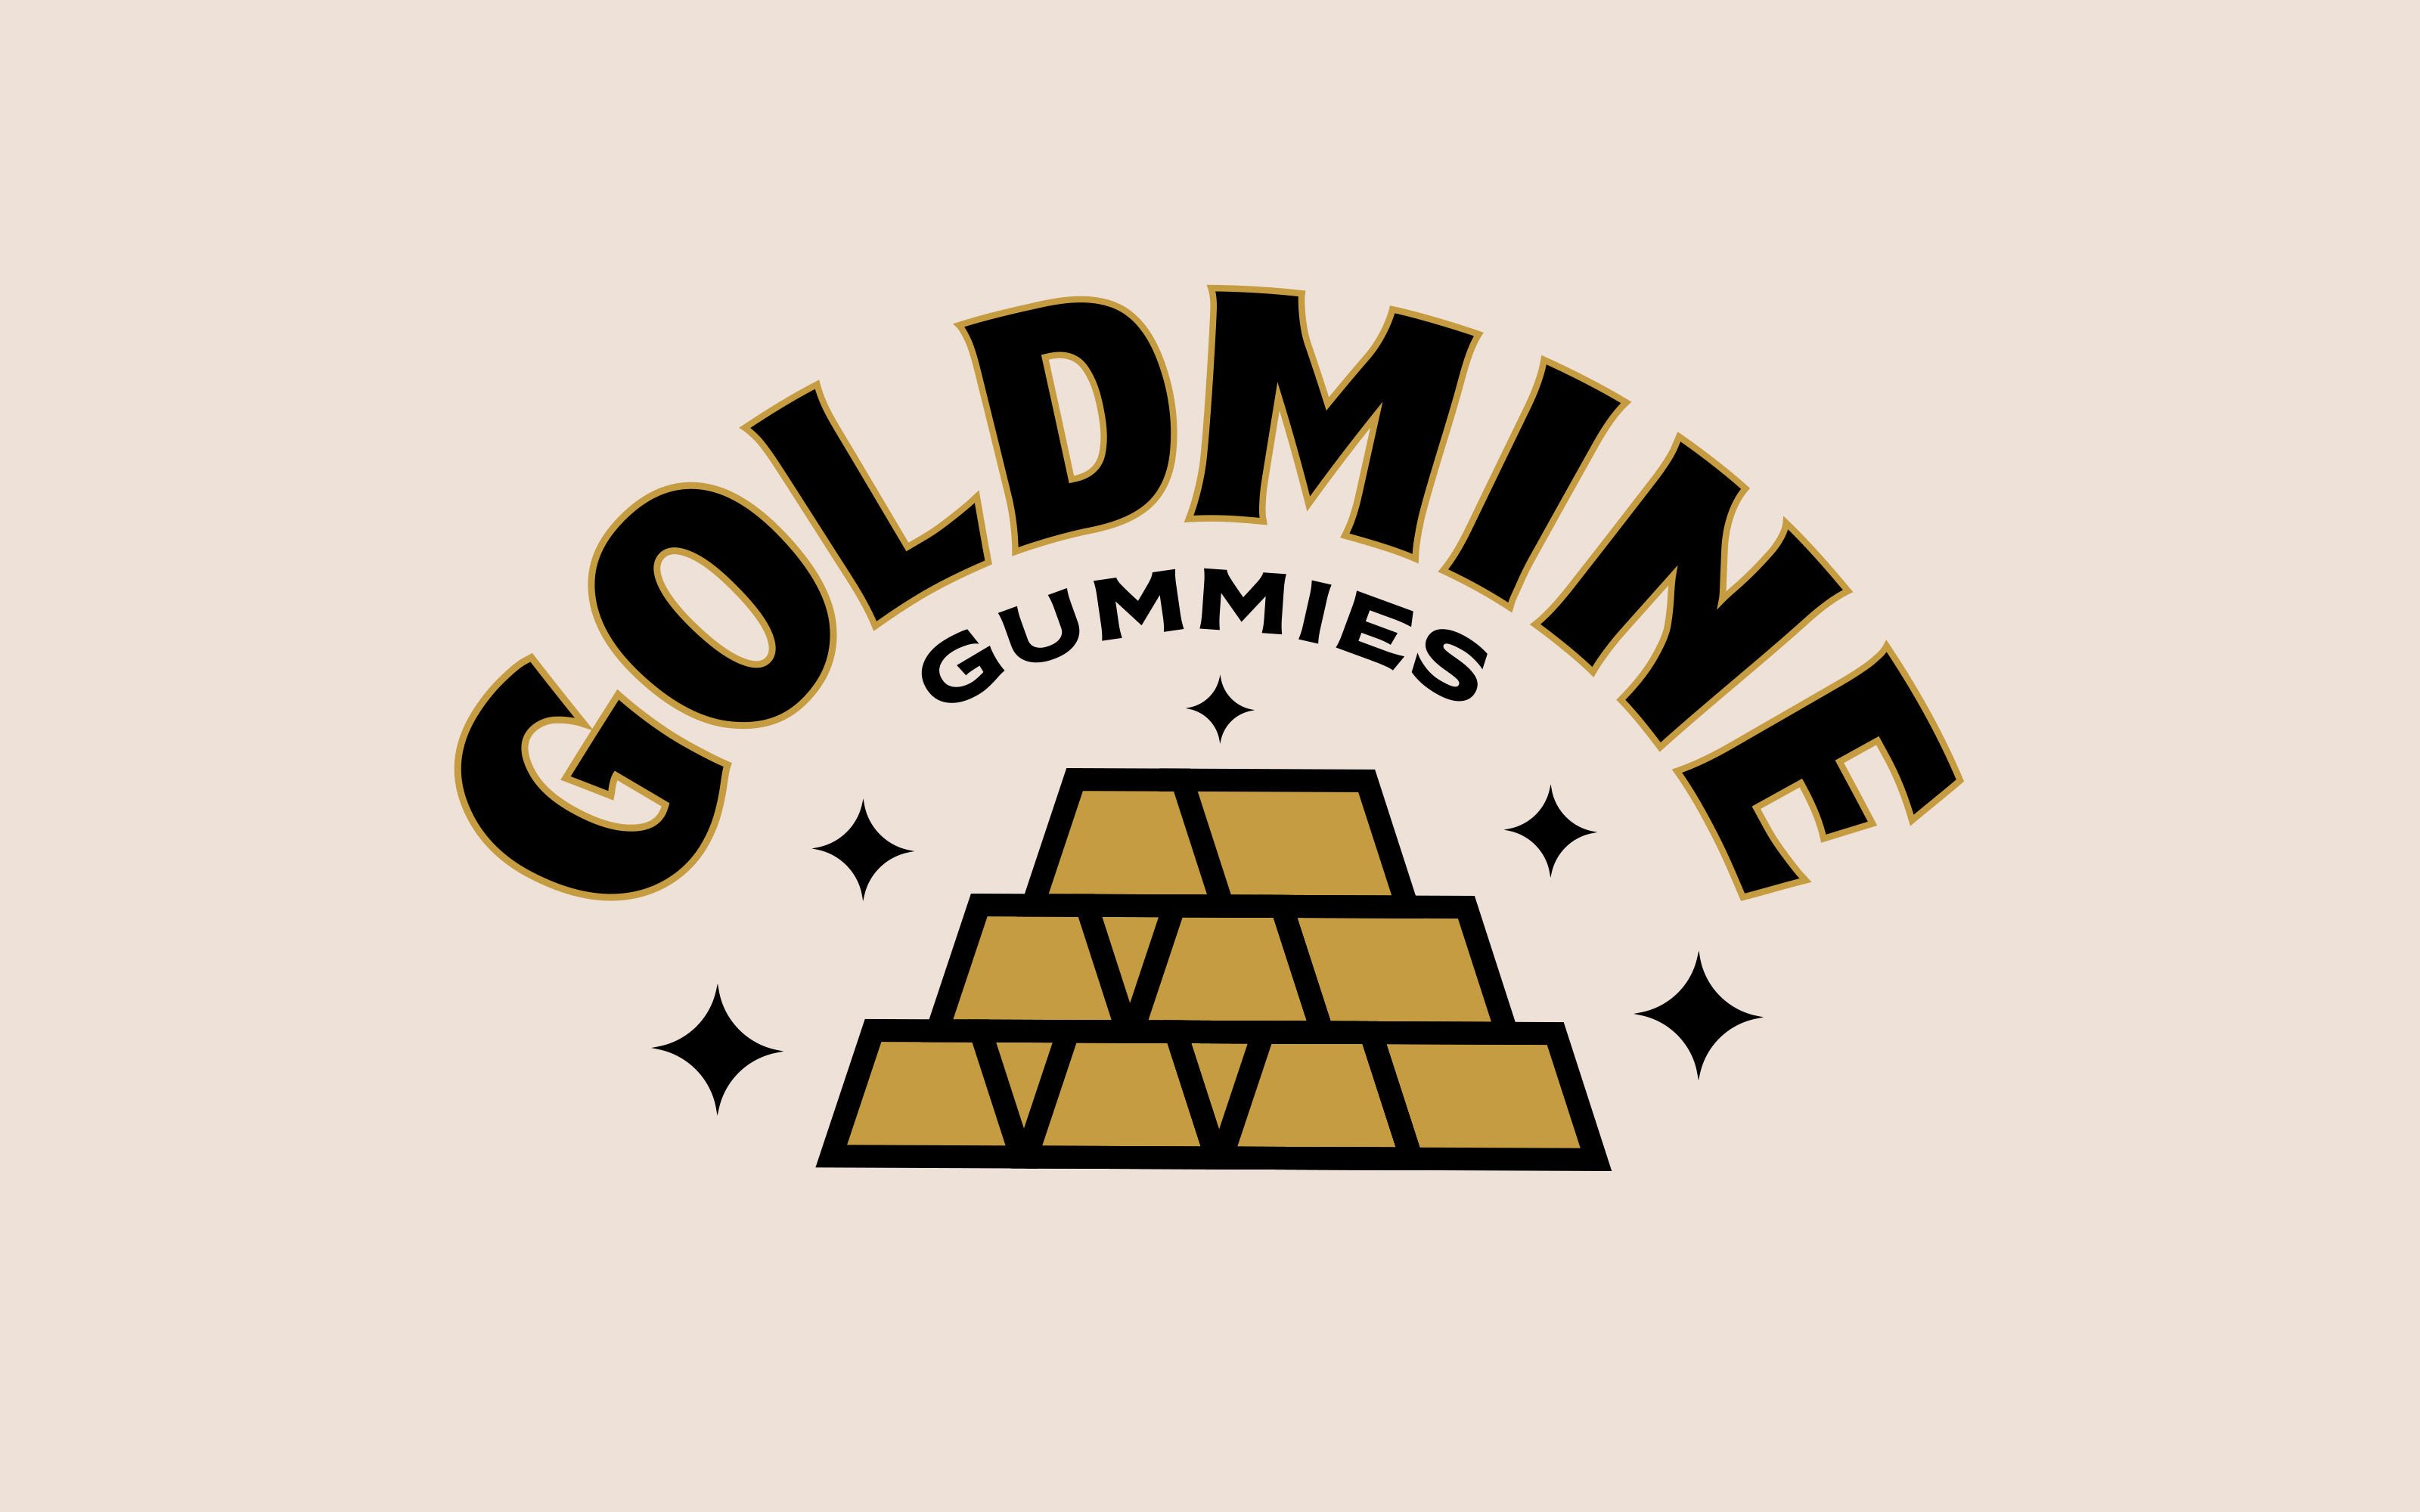 Logo design by Leeds-based Robot Food for cannabis-infused sweets Goldmine Gummies